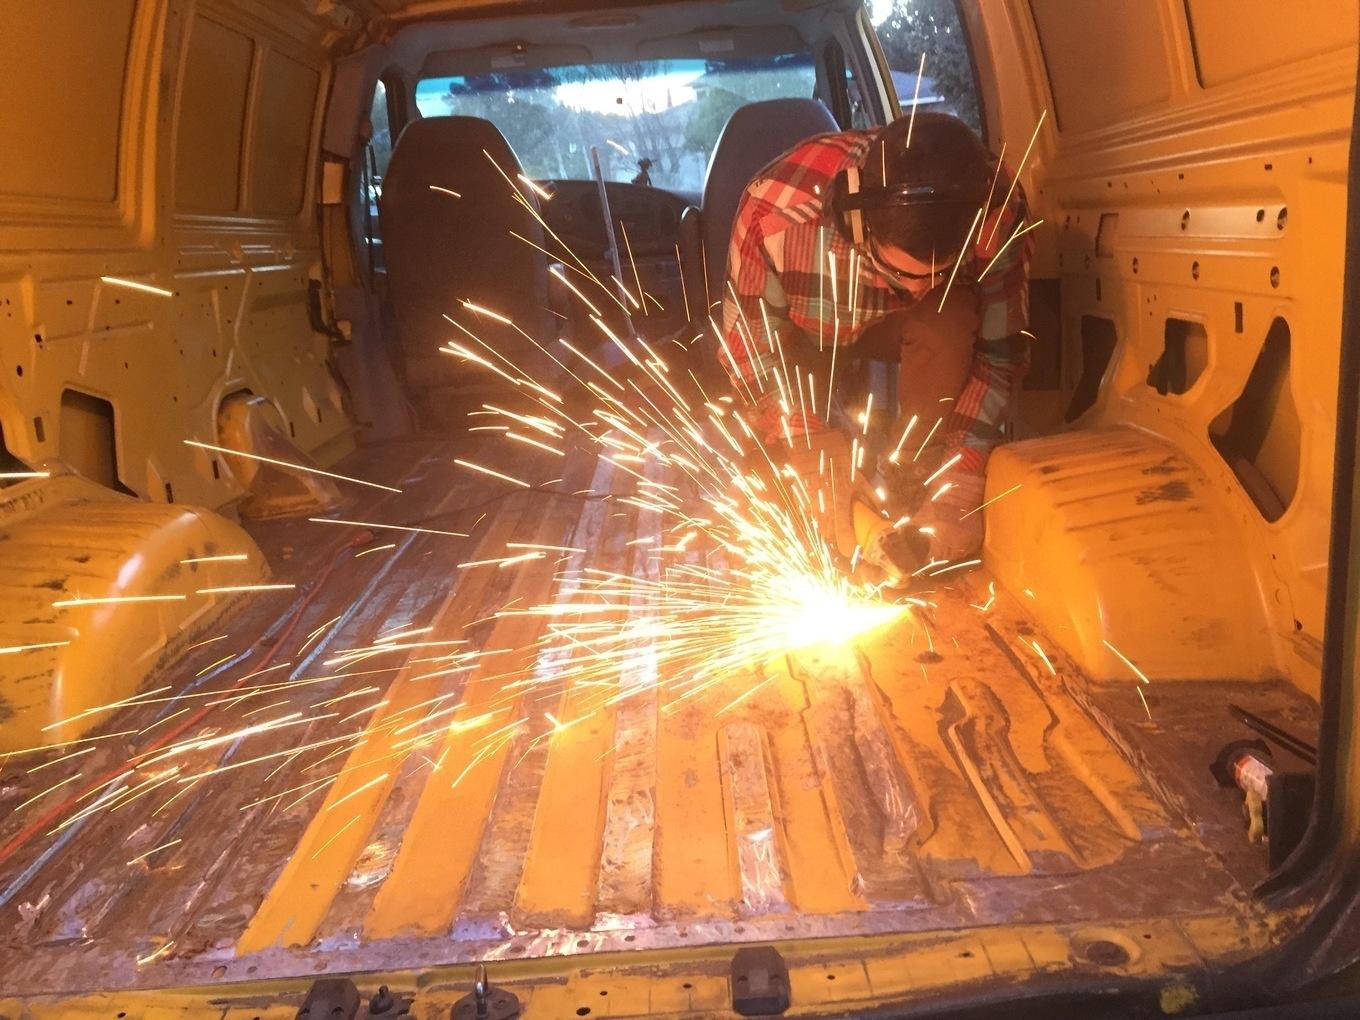 The heavy-duty angle grinder tackled the rust issue.